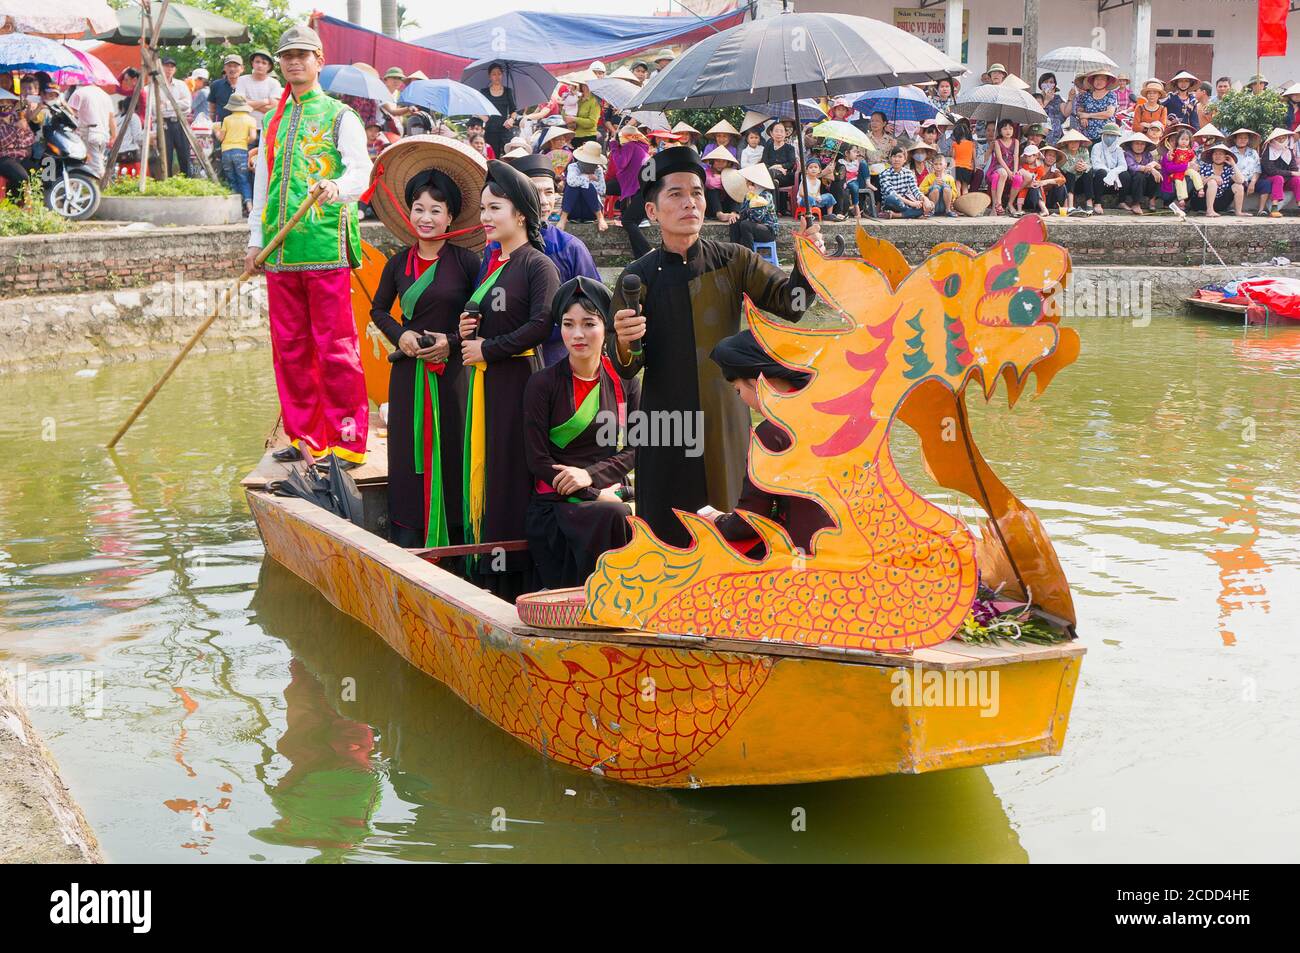 festival, folk singing on the boat. Intangible Heritage of Humanity, held at the lakes Bac Ninh, Vietnam Stock Photo